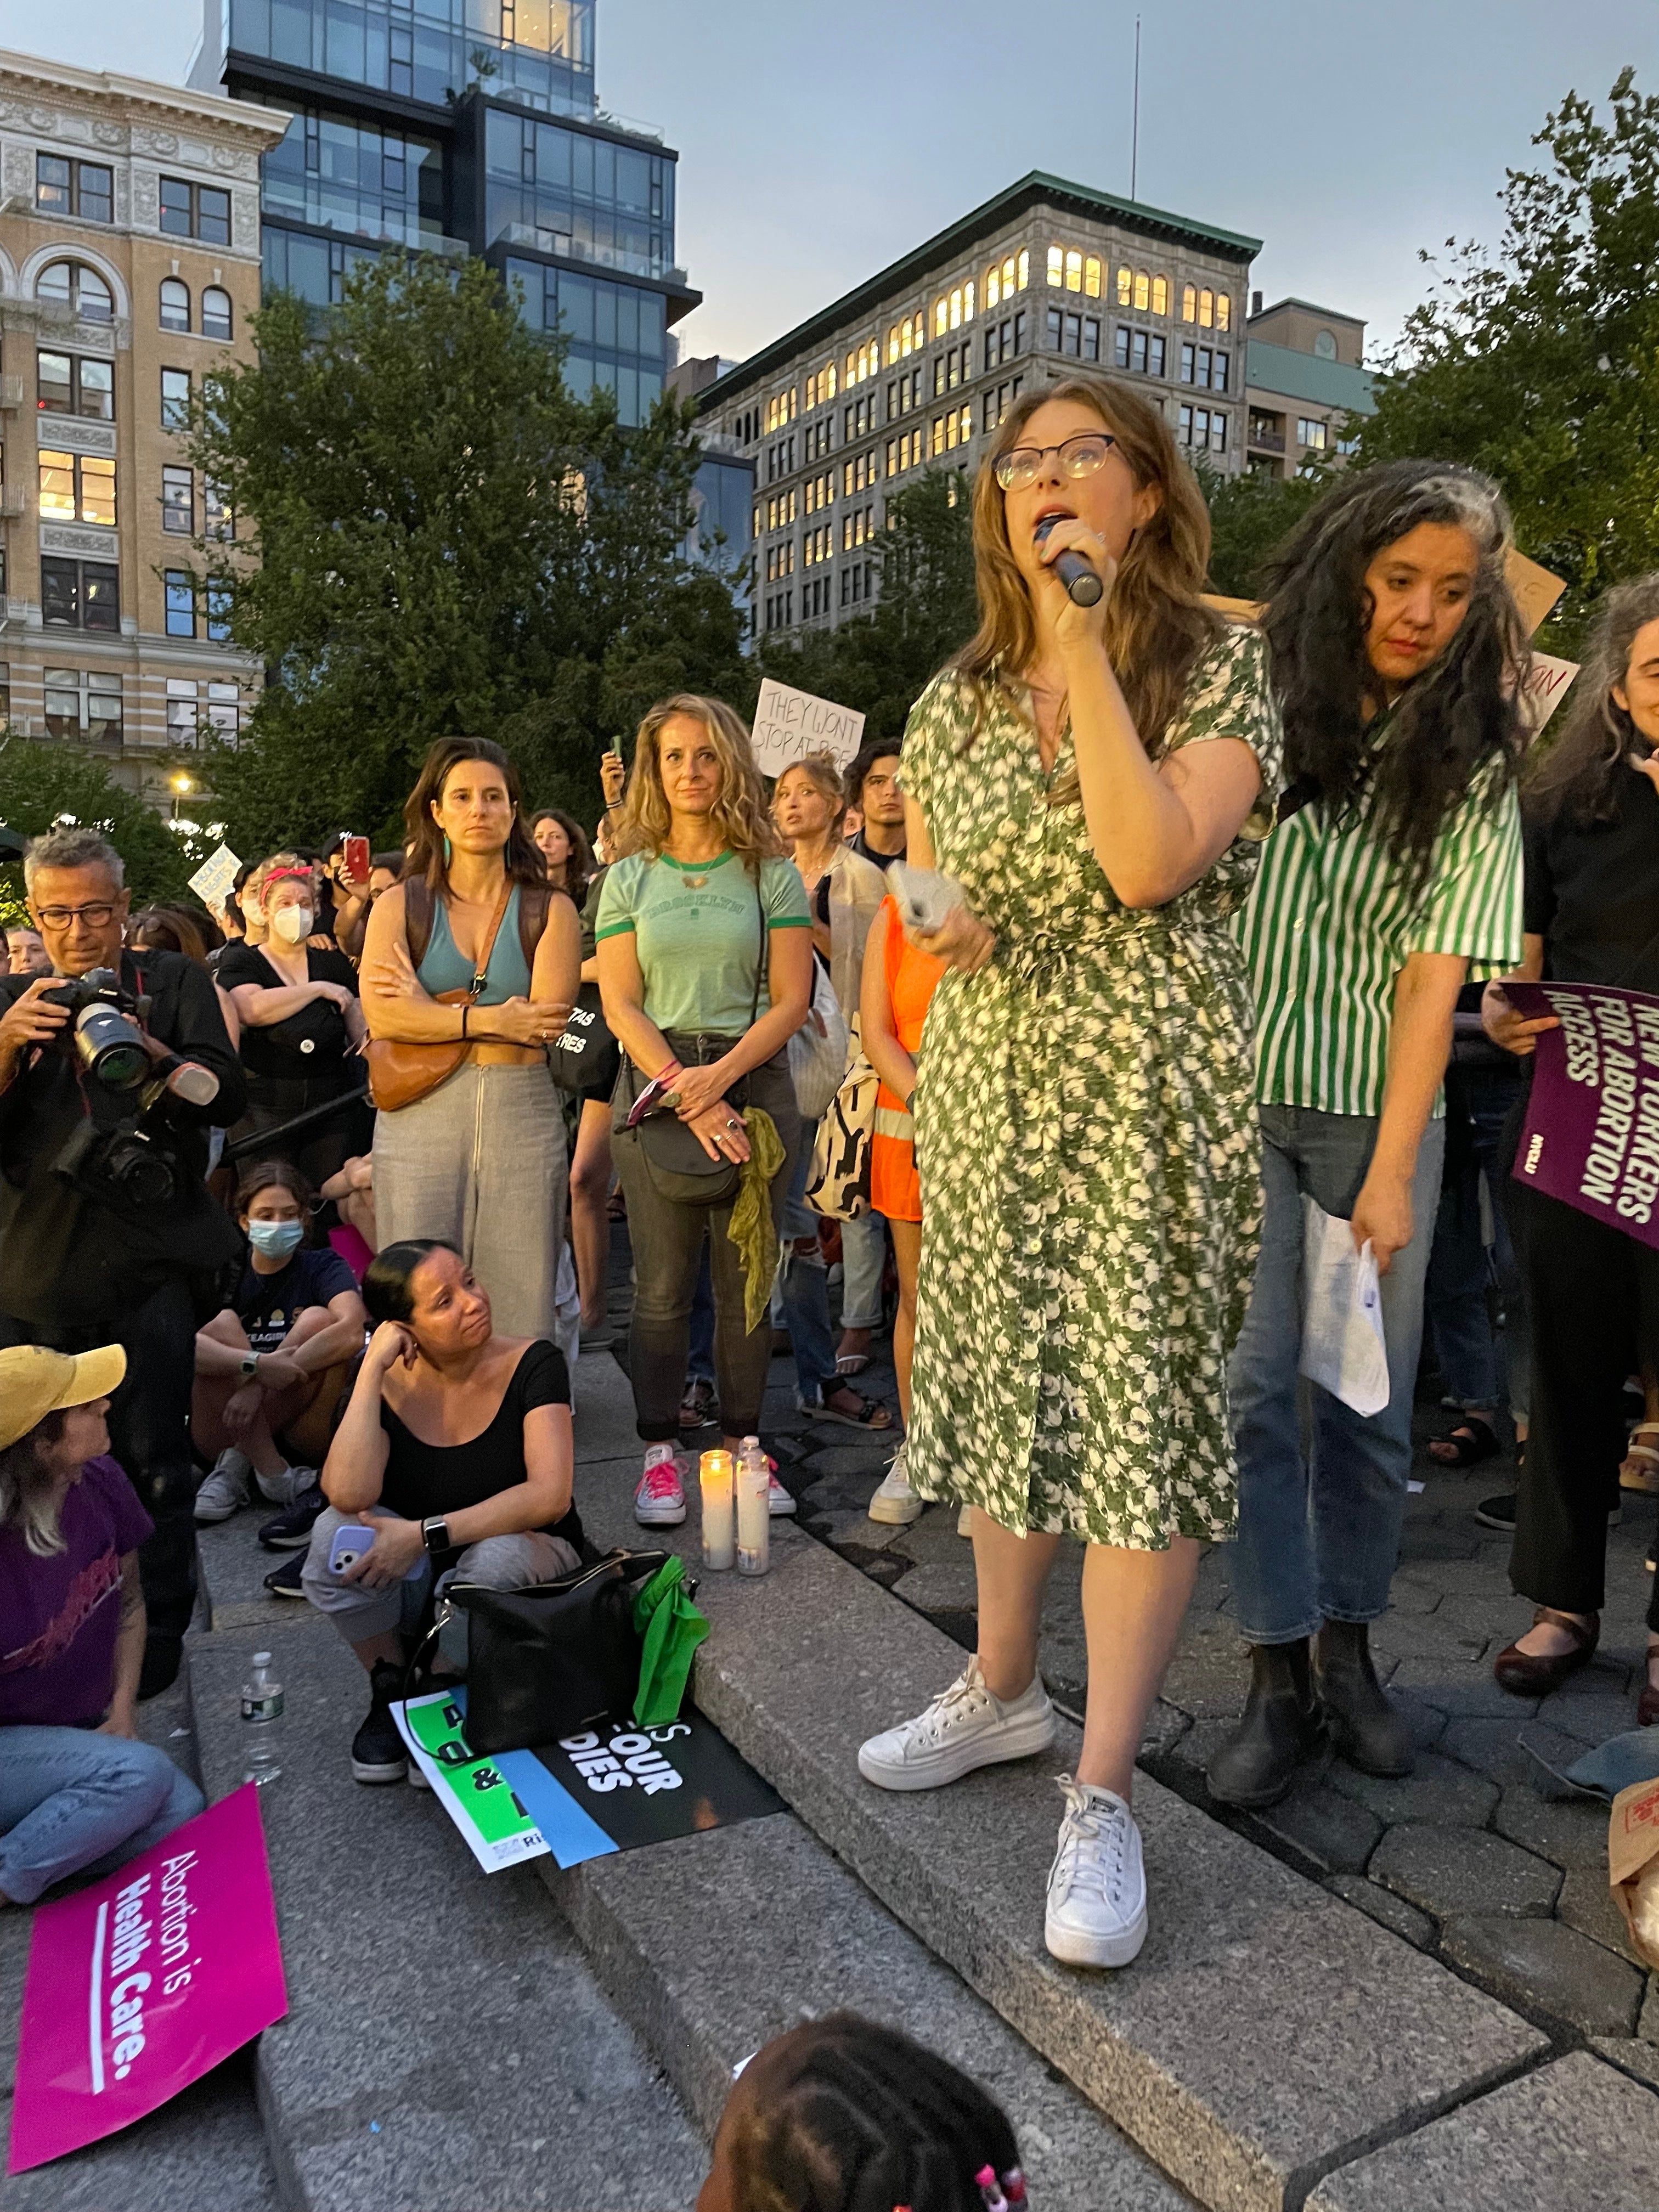 A person speaking at a pro-abortion event in Union Square in New York City.